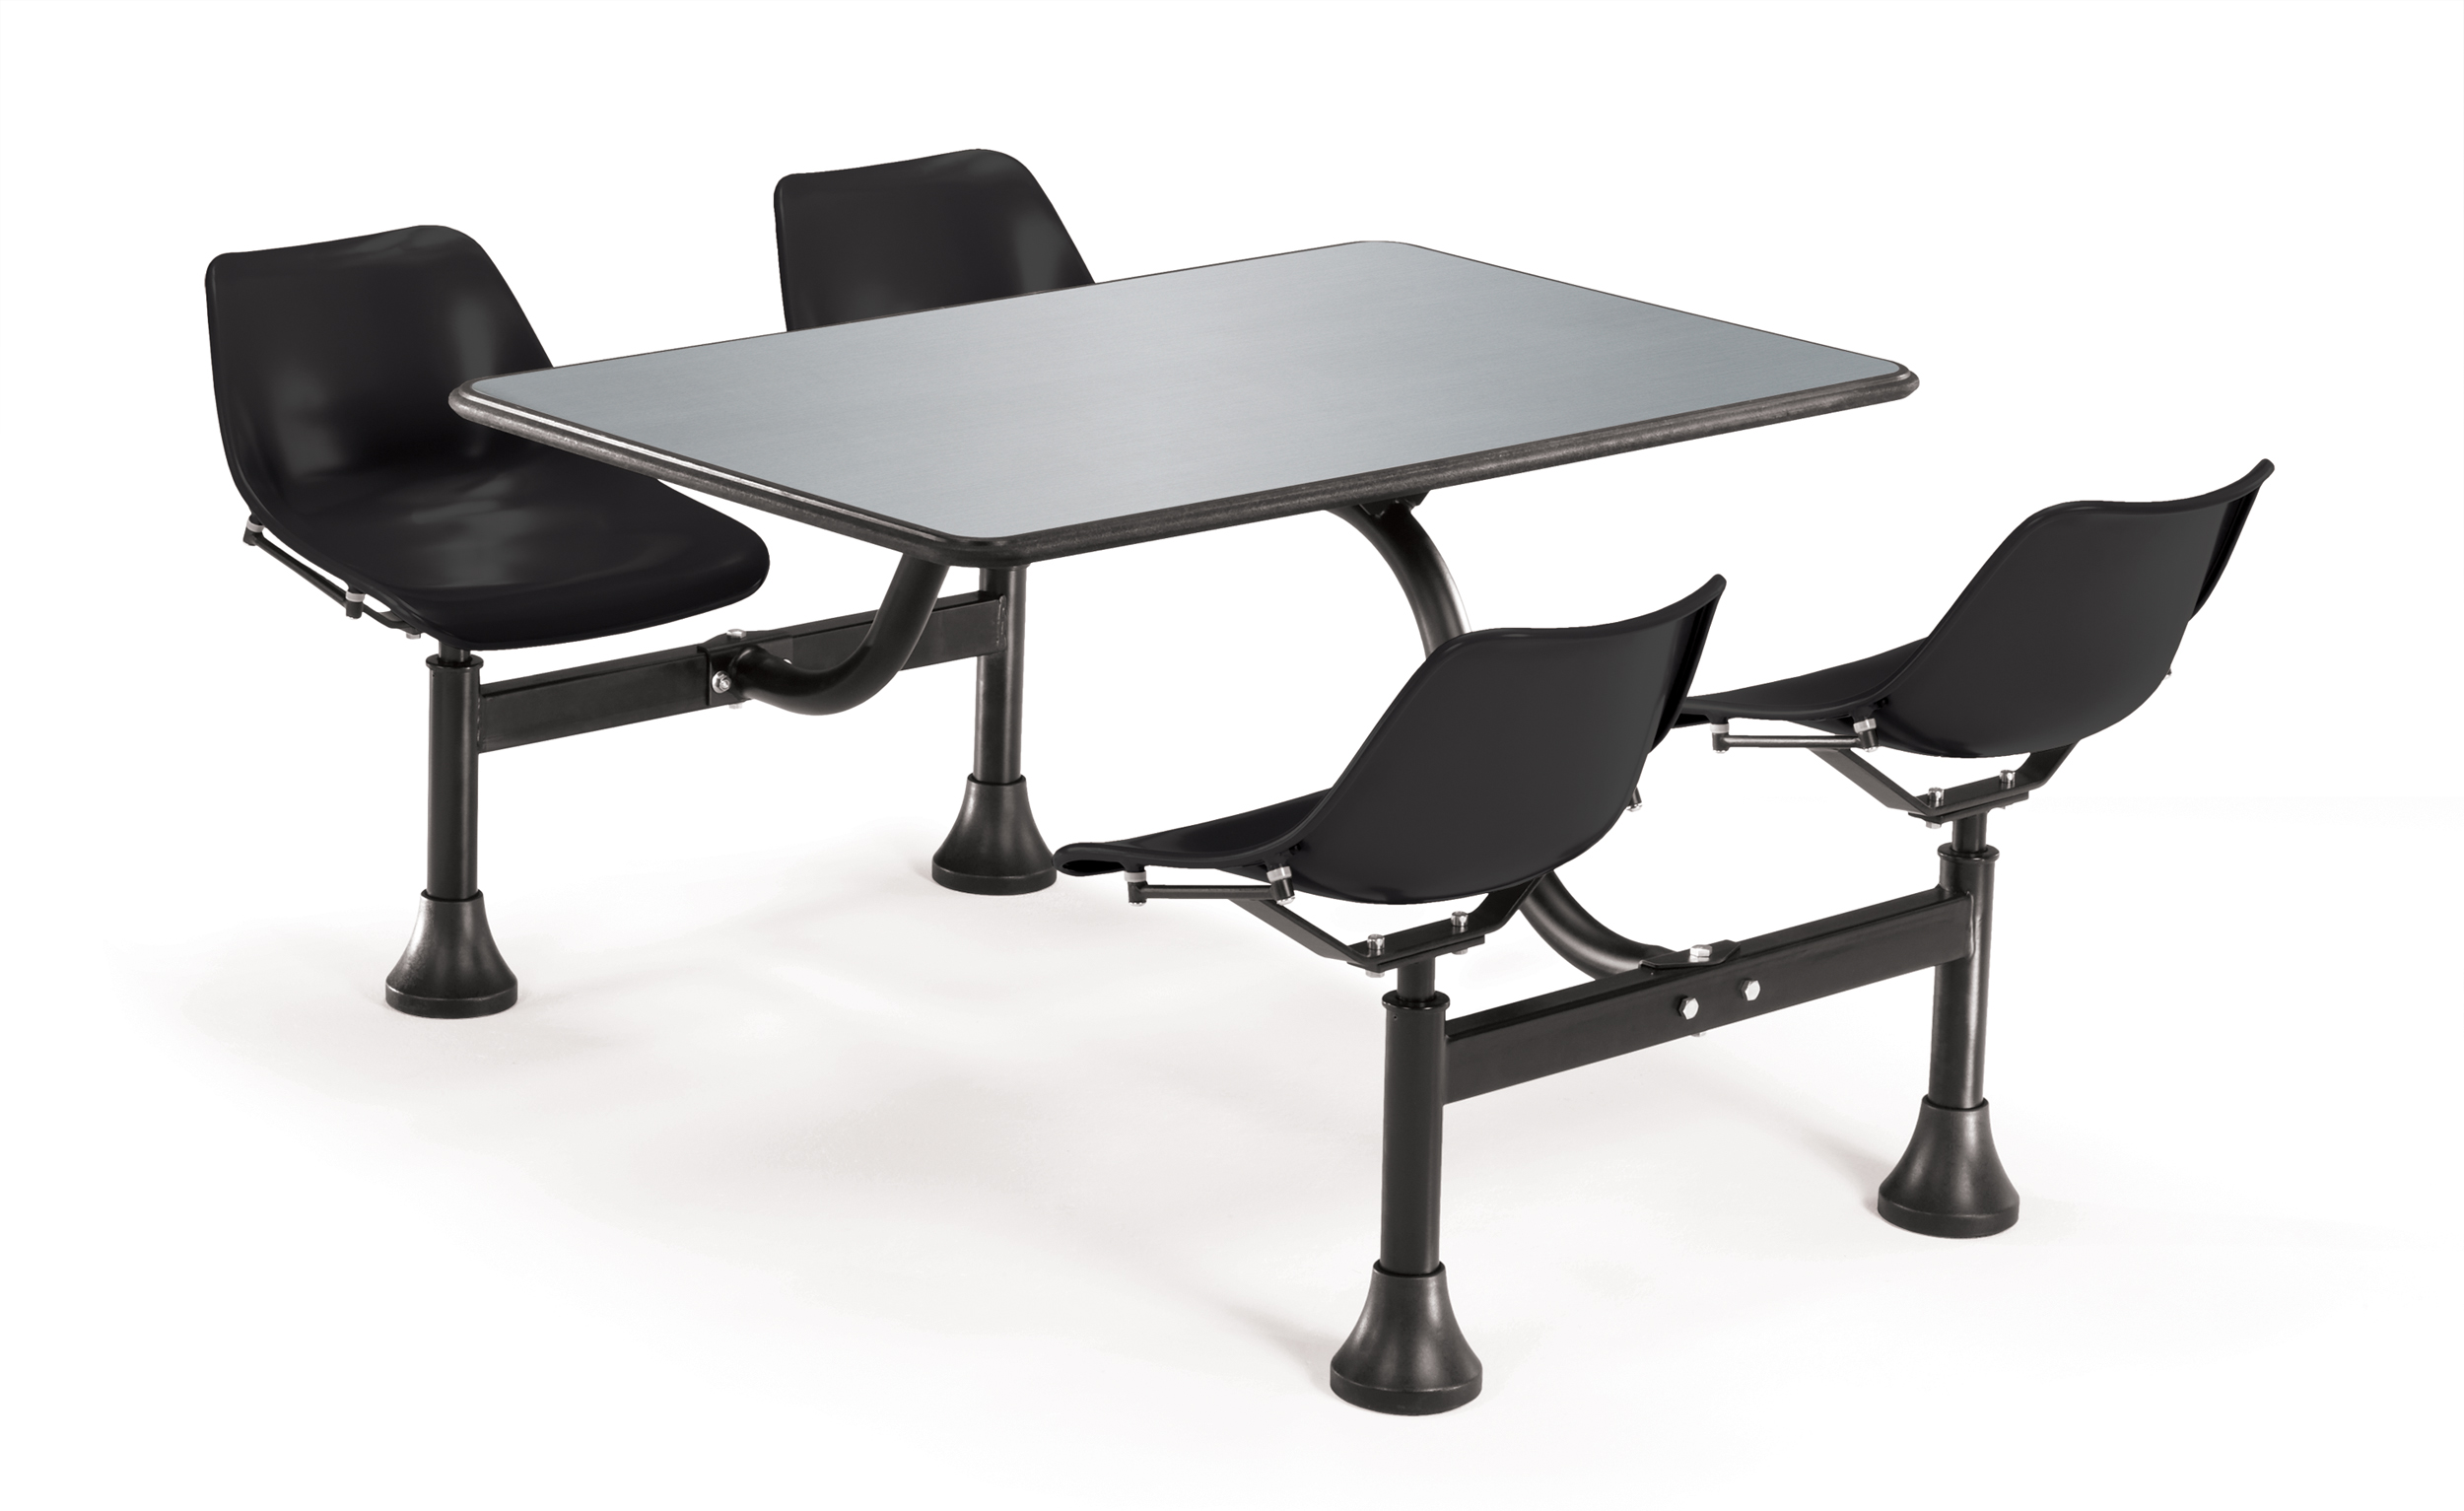 Retro Table and Chairs Cluster | Millennium Seating